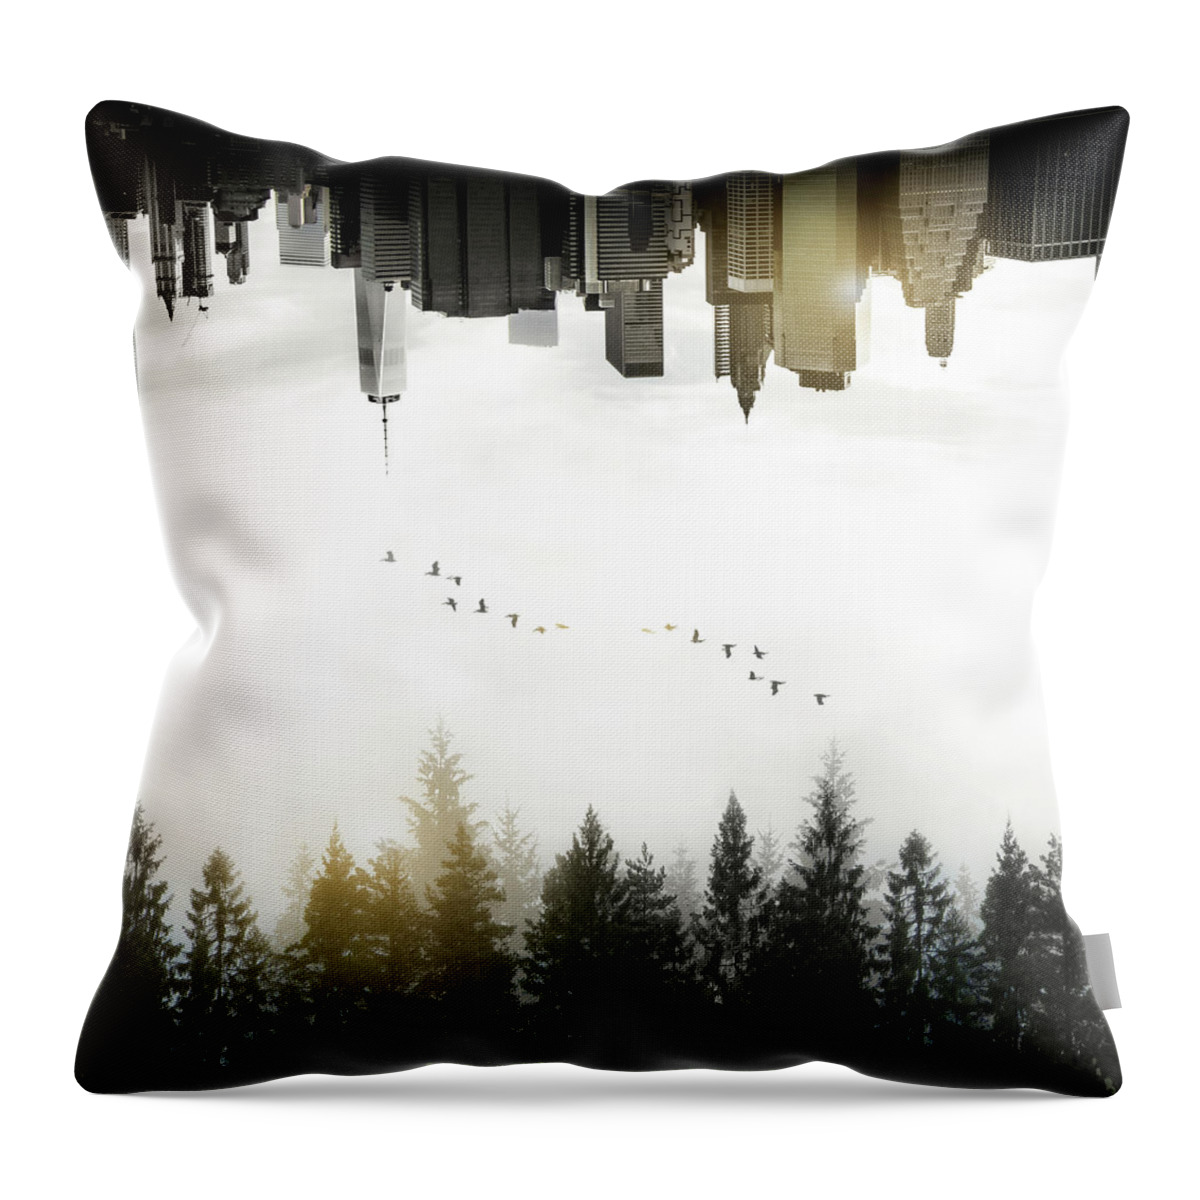 Duality Throw Pillow featuring the photograph Duality by Nicklas Gustafsson